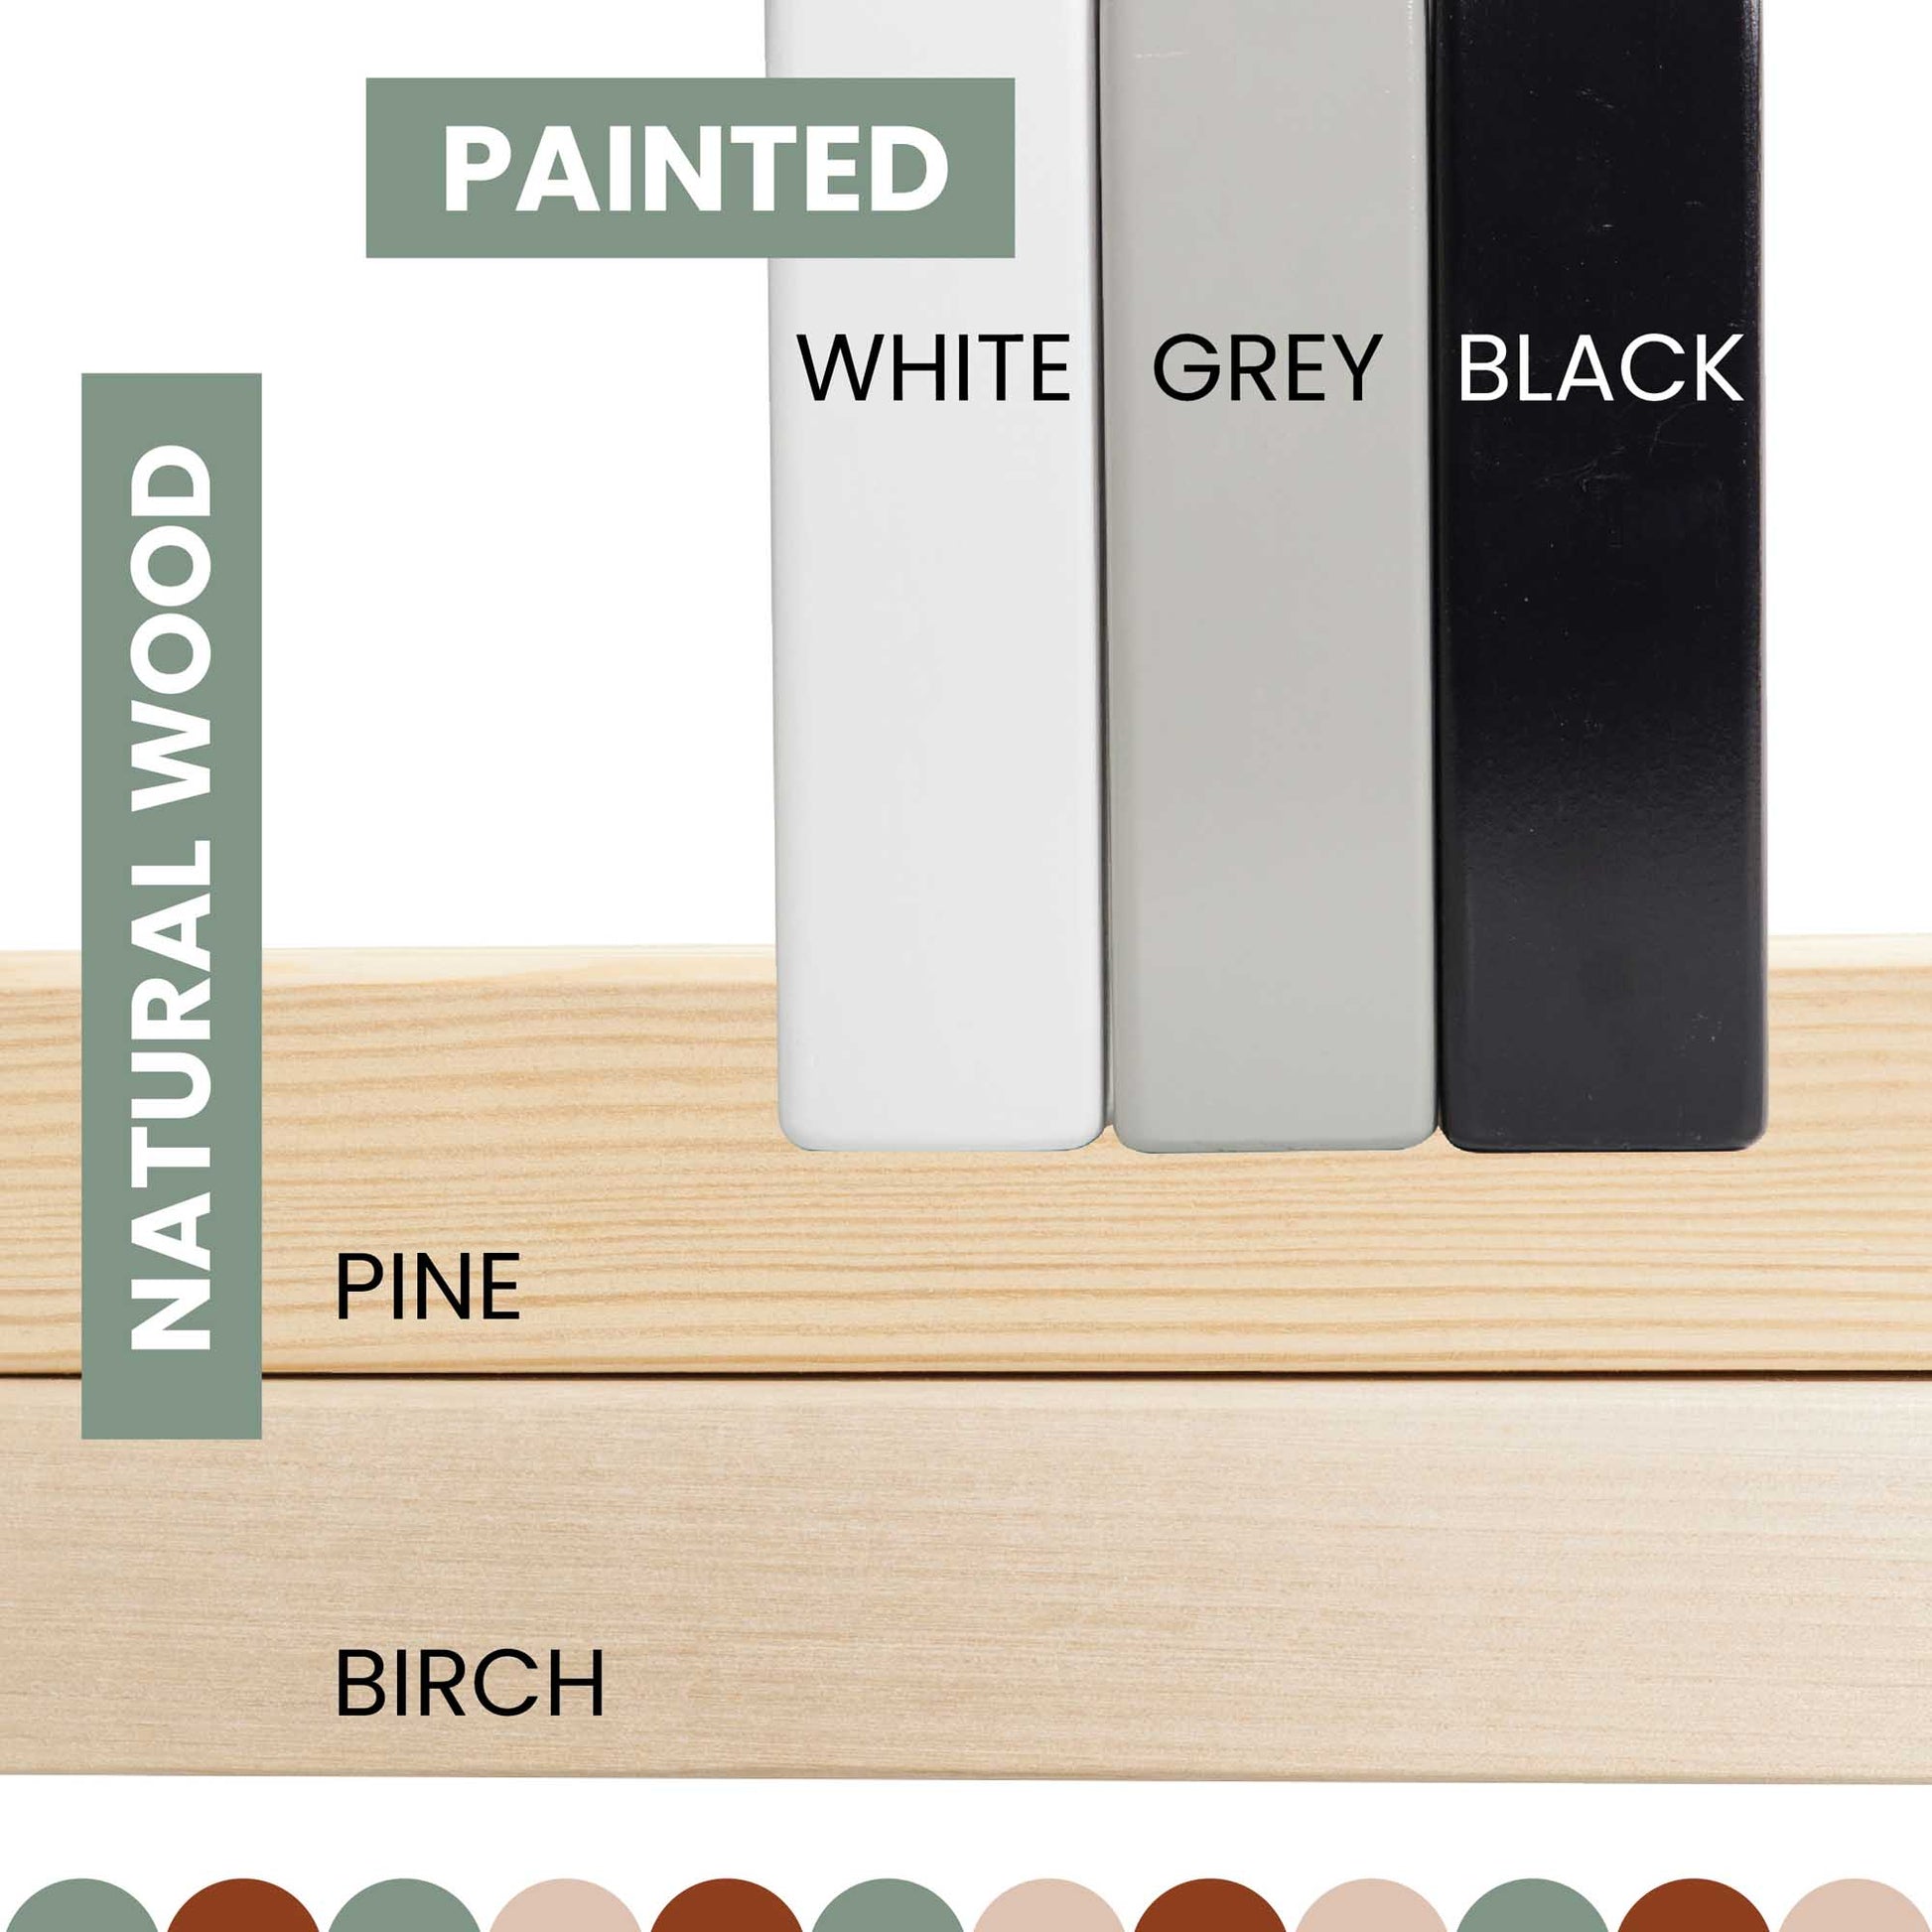 The paint colors for the 2-in-1 kid's bed on legs with a vertical rail headboard and footboard.